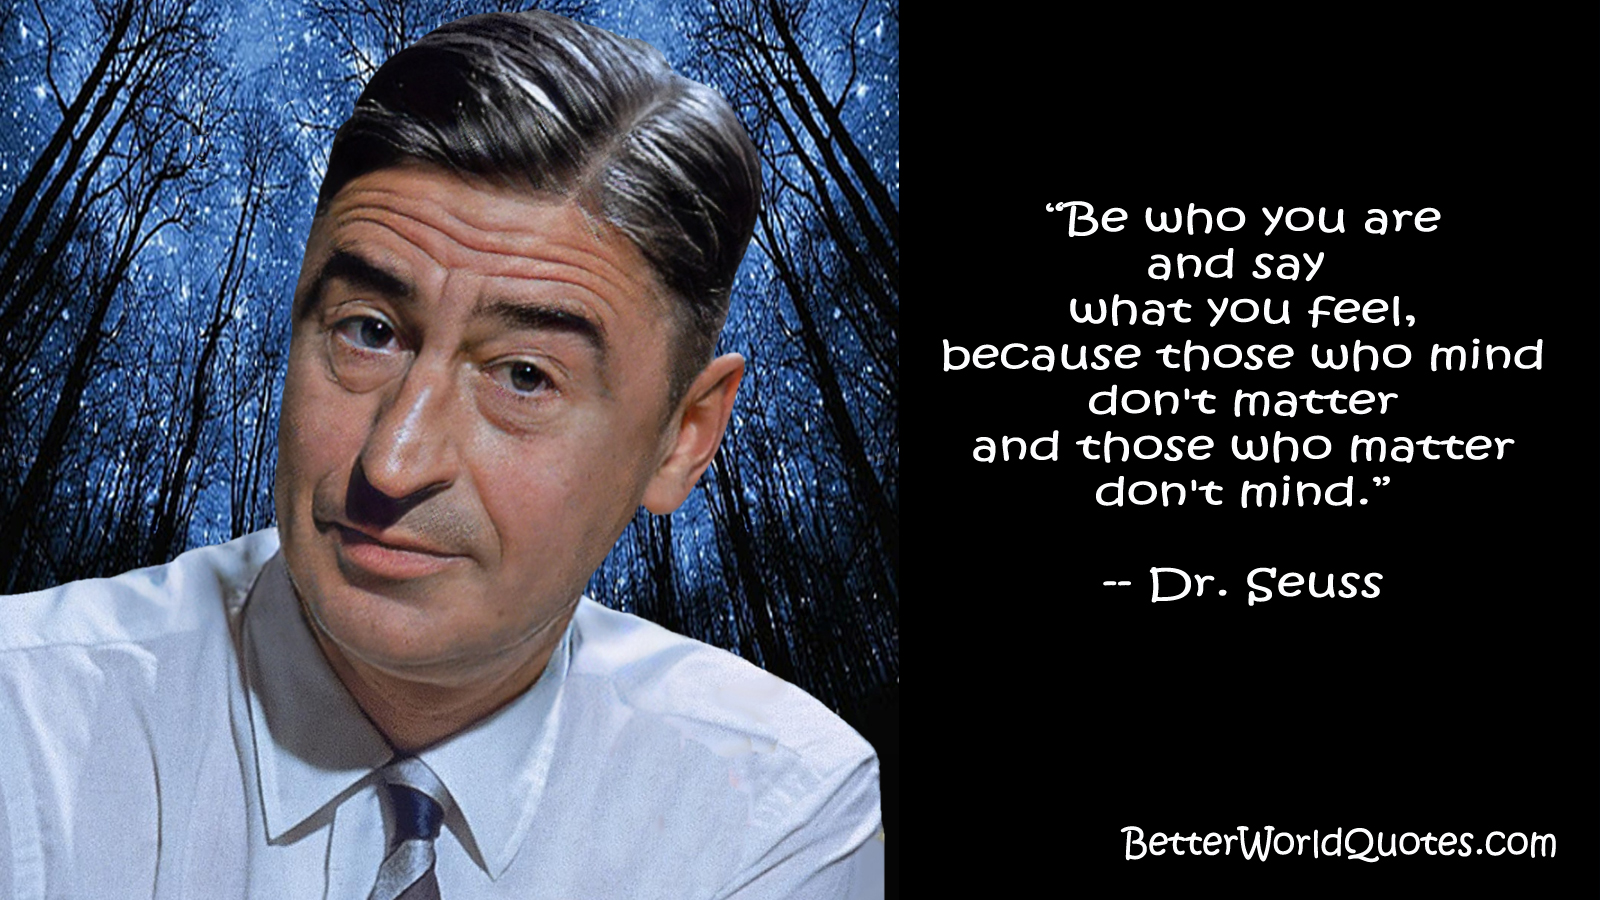 Dr. Seuss: Be who you are and say what you feel, because in the end those who matter don't mind and those who mind don't matter.